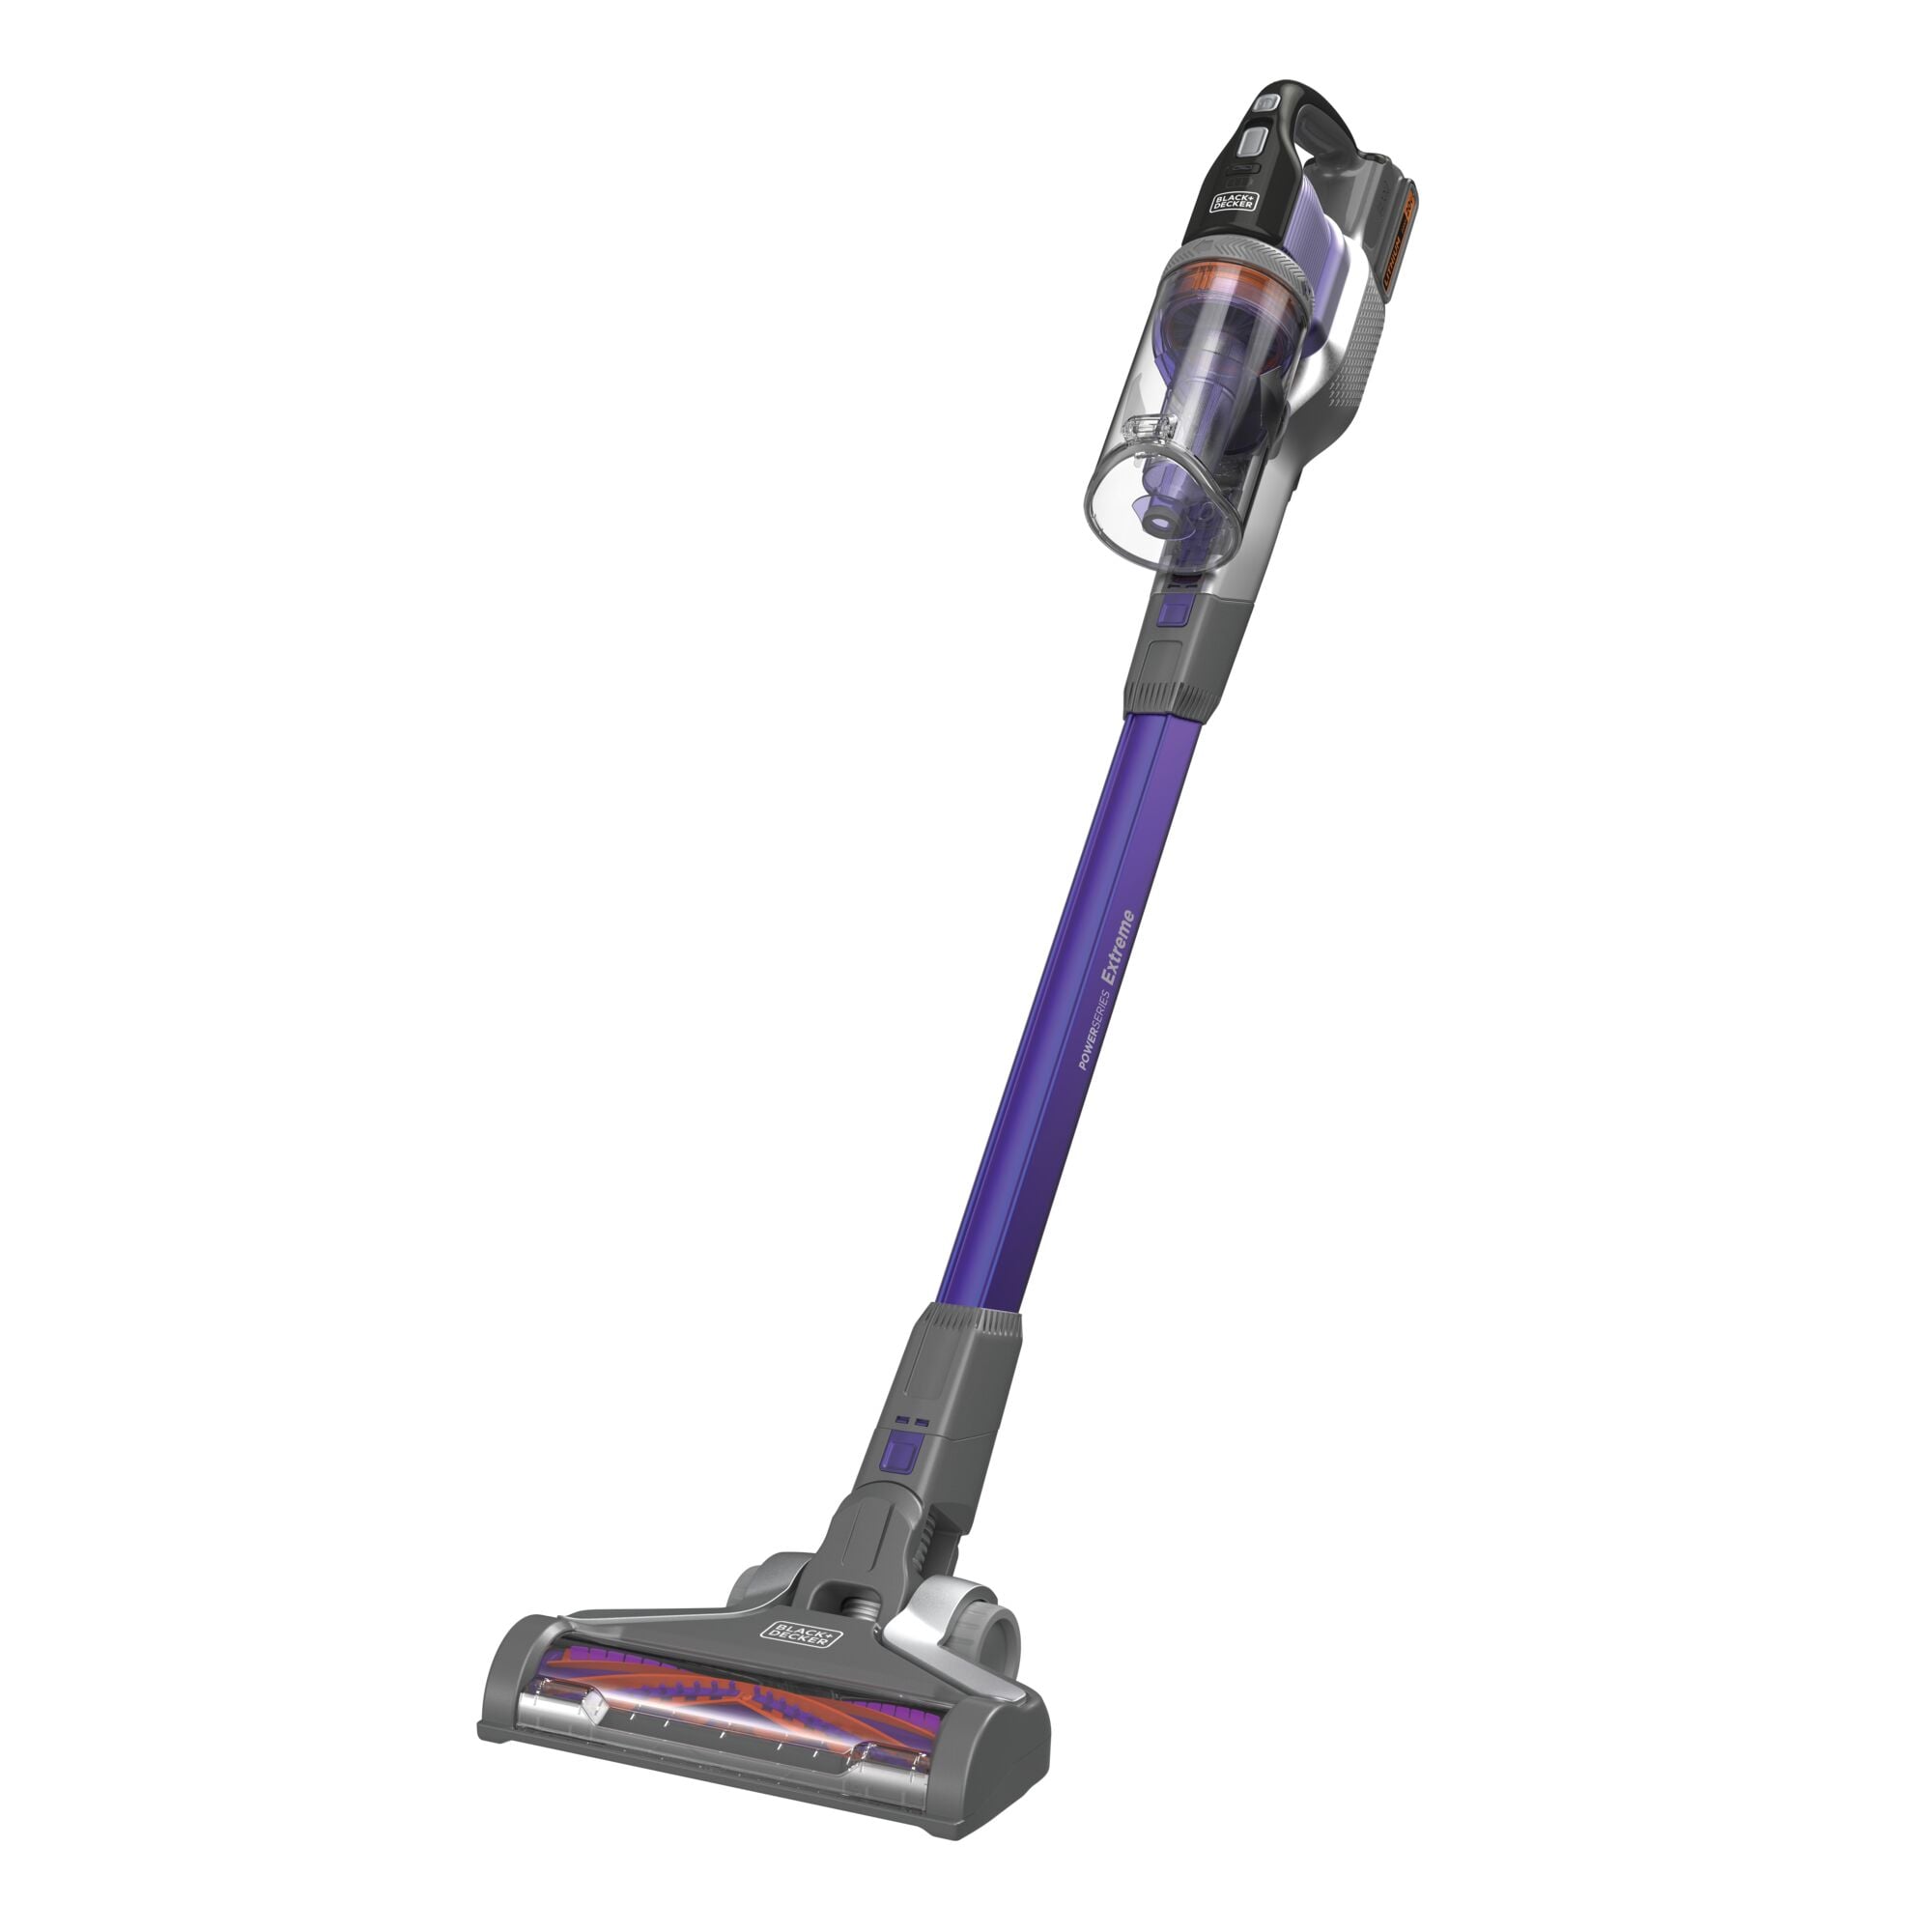 Black+Decker Cordless 2 in 1 Multipower Pro Vac  Buy a Black+Decker  Cordless 2 in 1 Multipower Pro Vac for only £149.99 (saving £100 on MRP)  and get a 1300W Steam Mop